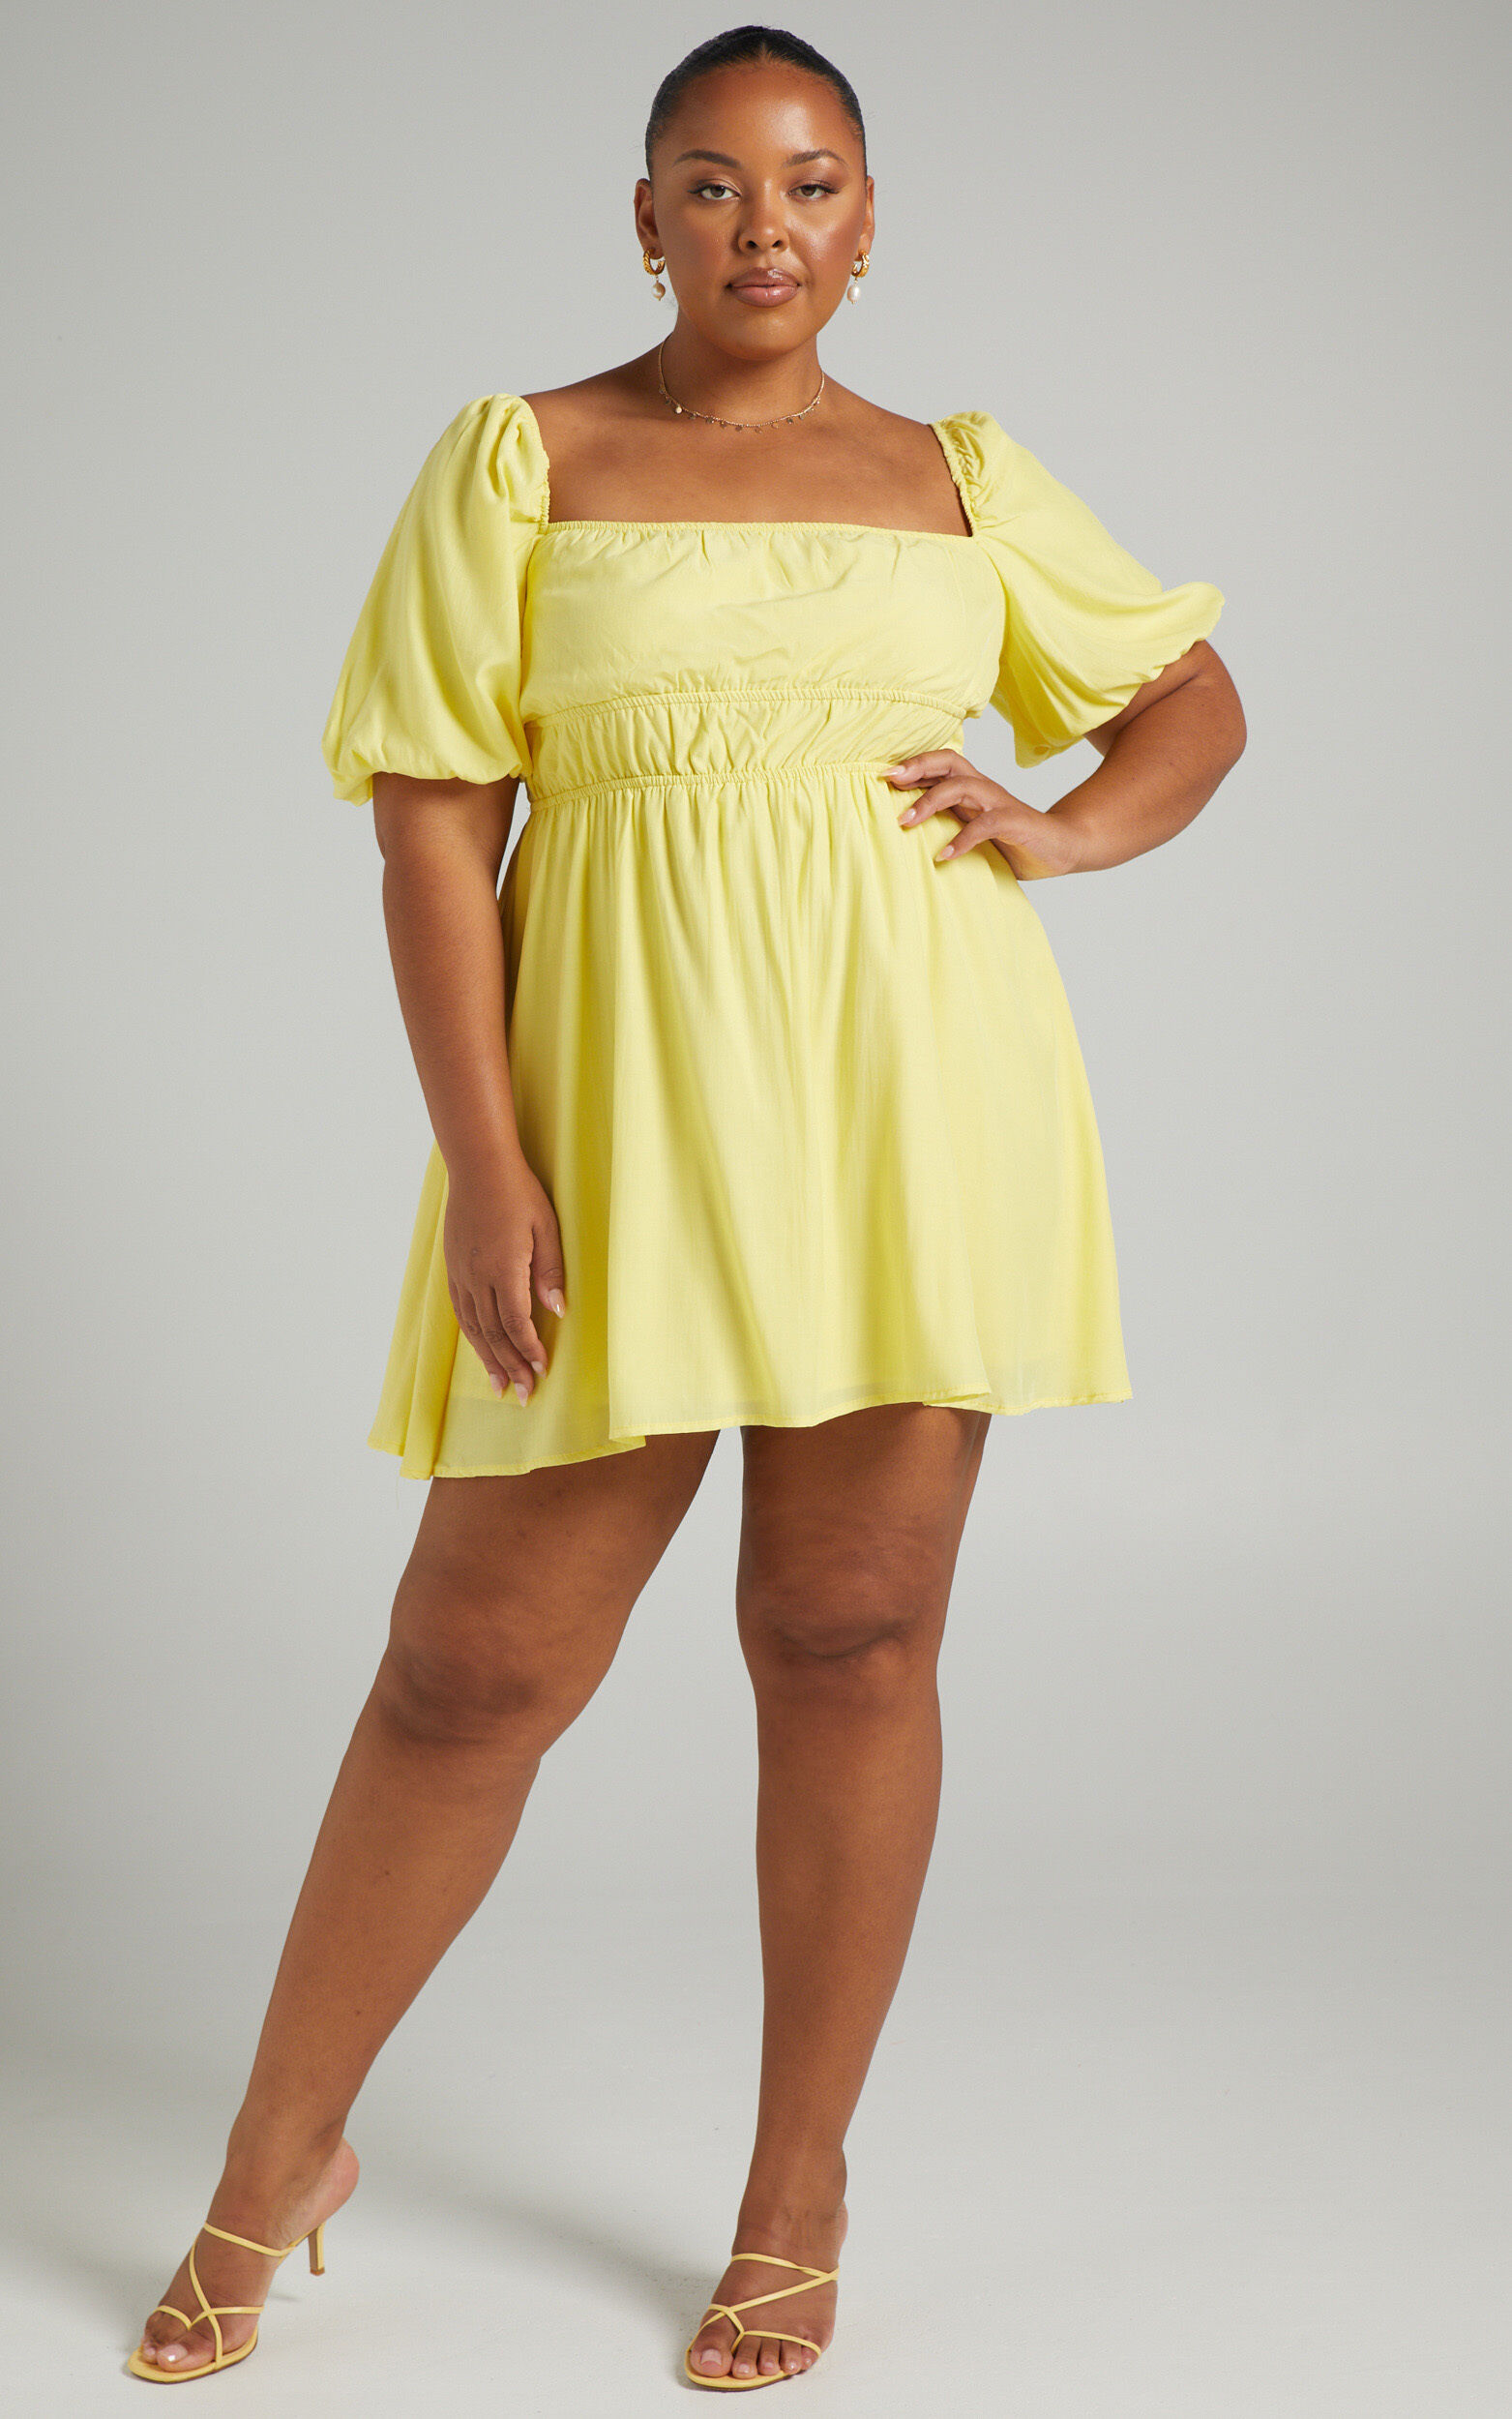 Maretta Stretch Waist Square Neck Mini Dress in Butter Yellow - 06, YEL2, super-hi-res image number null